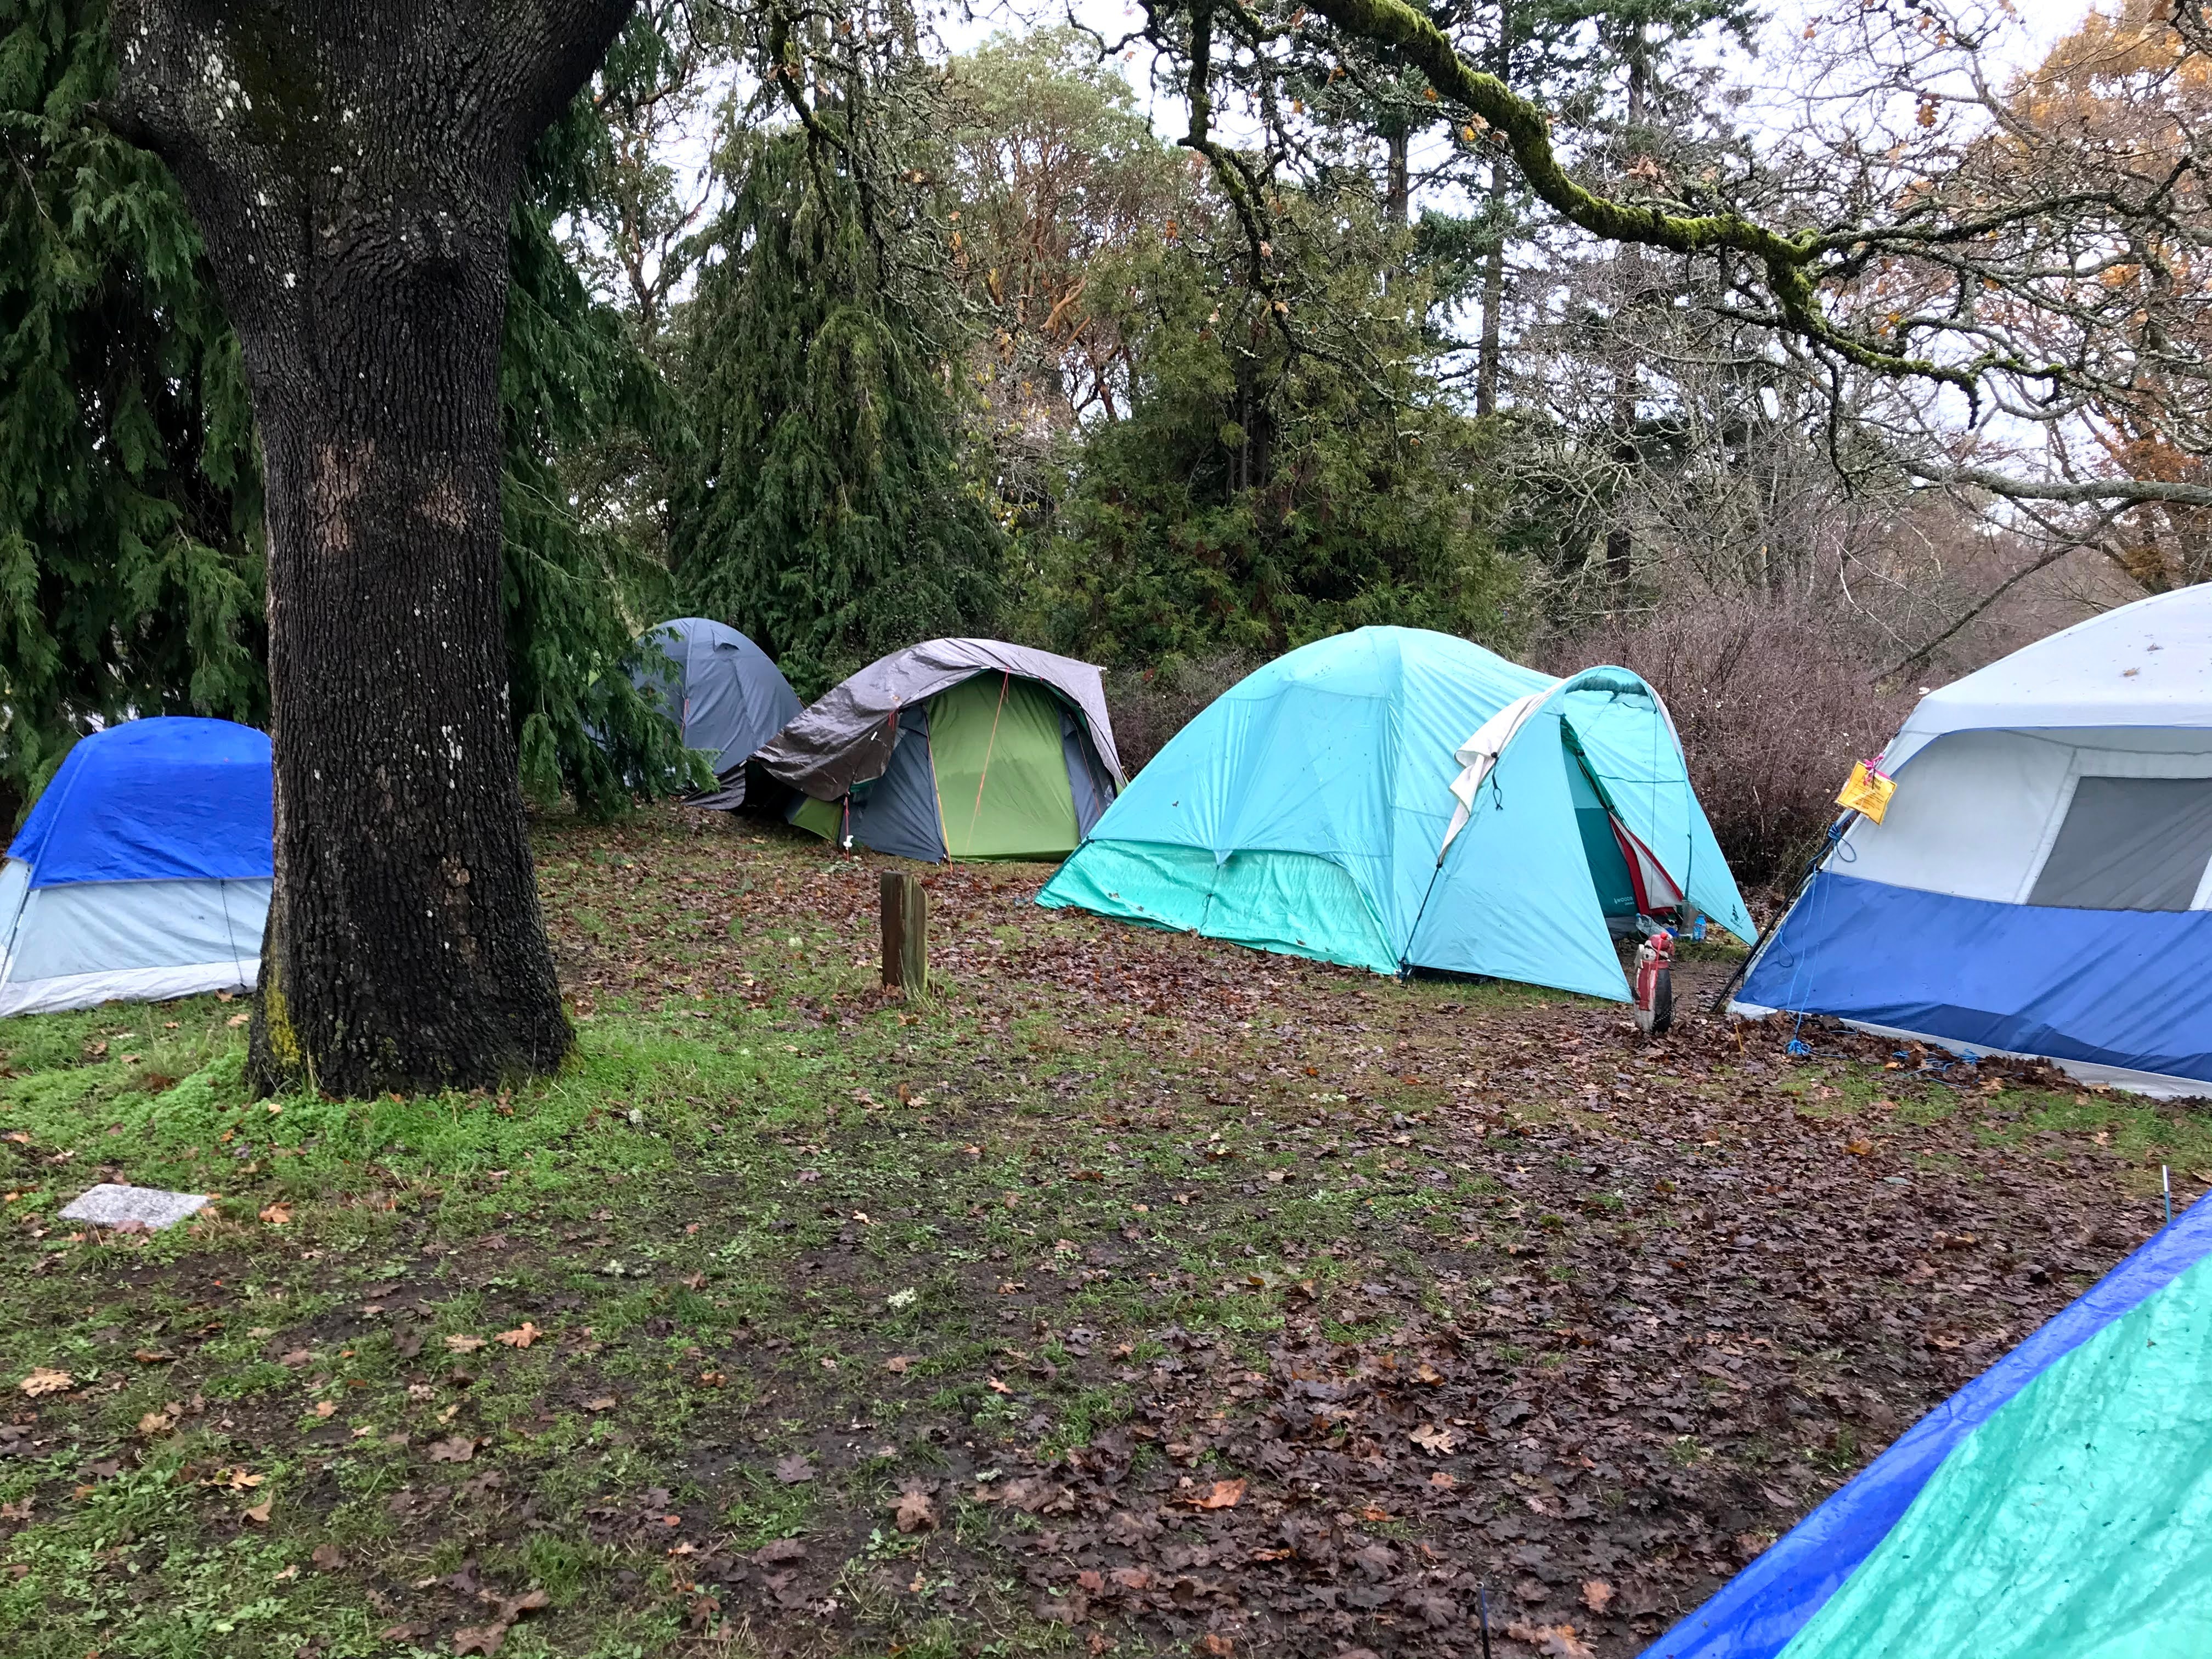 Six tents set up amongst the trees and grass in Beacon Hill Park in 2020. They have tarps over them to protect them from the rain.